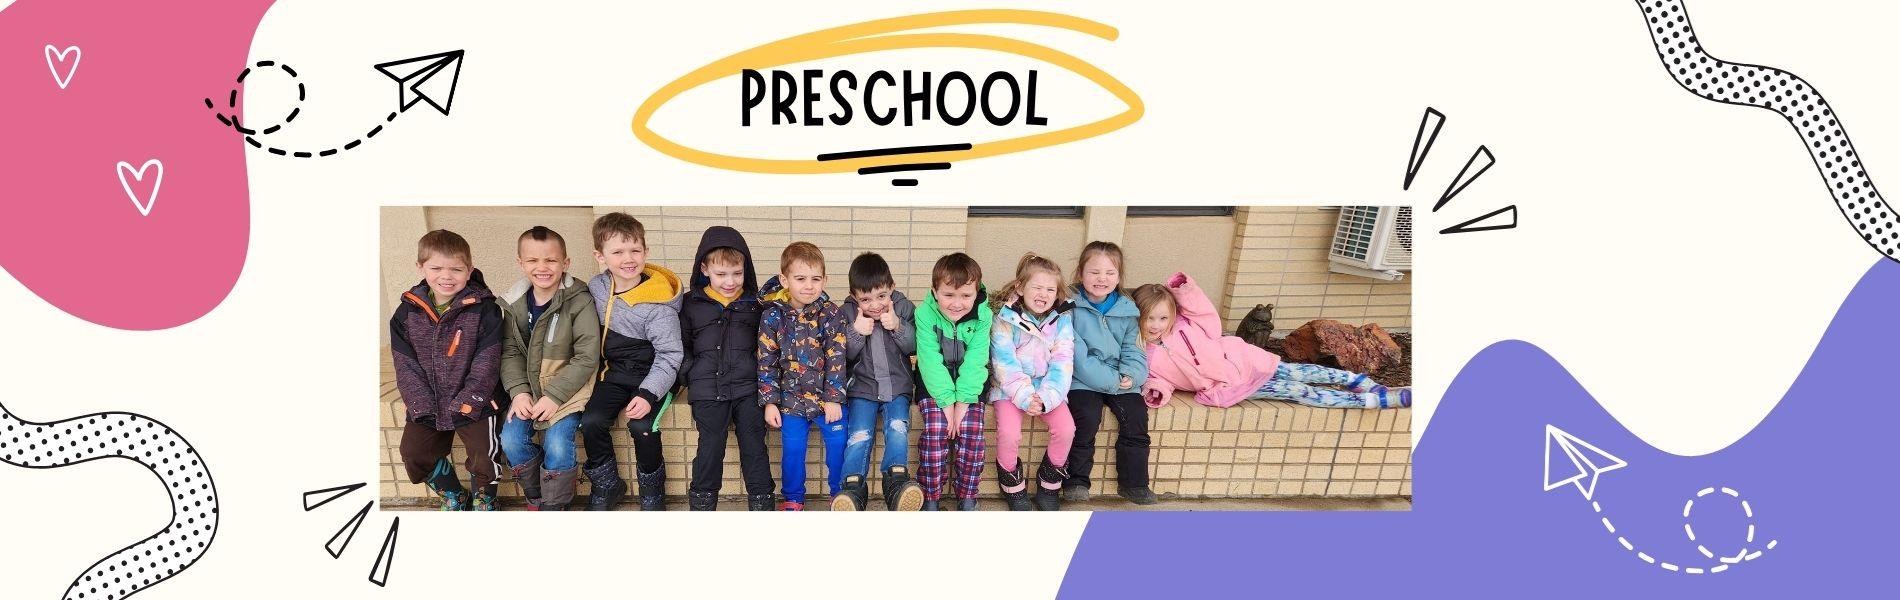 image of preschool students outside on a colorful background